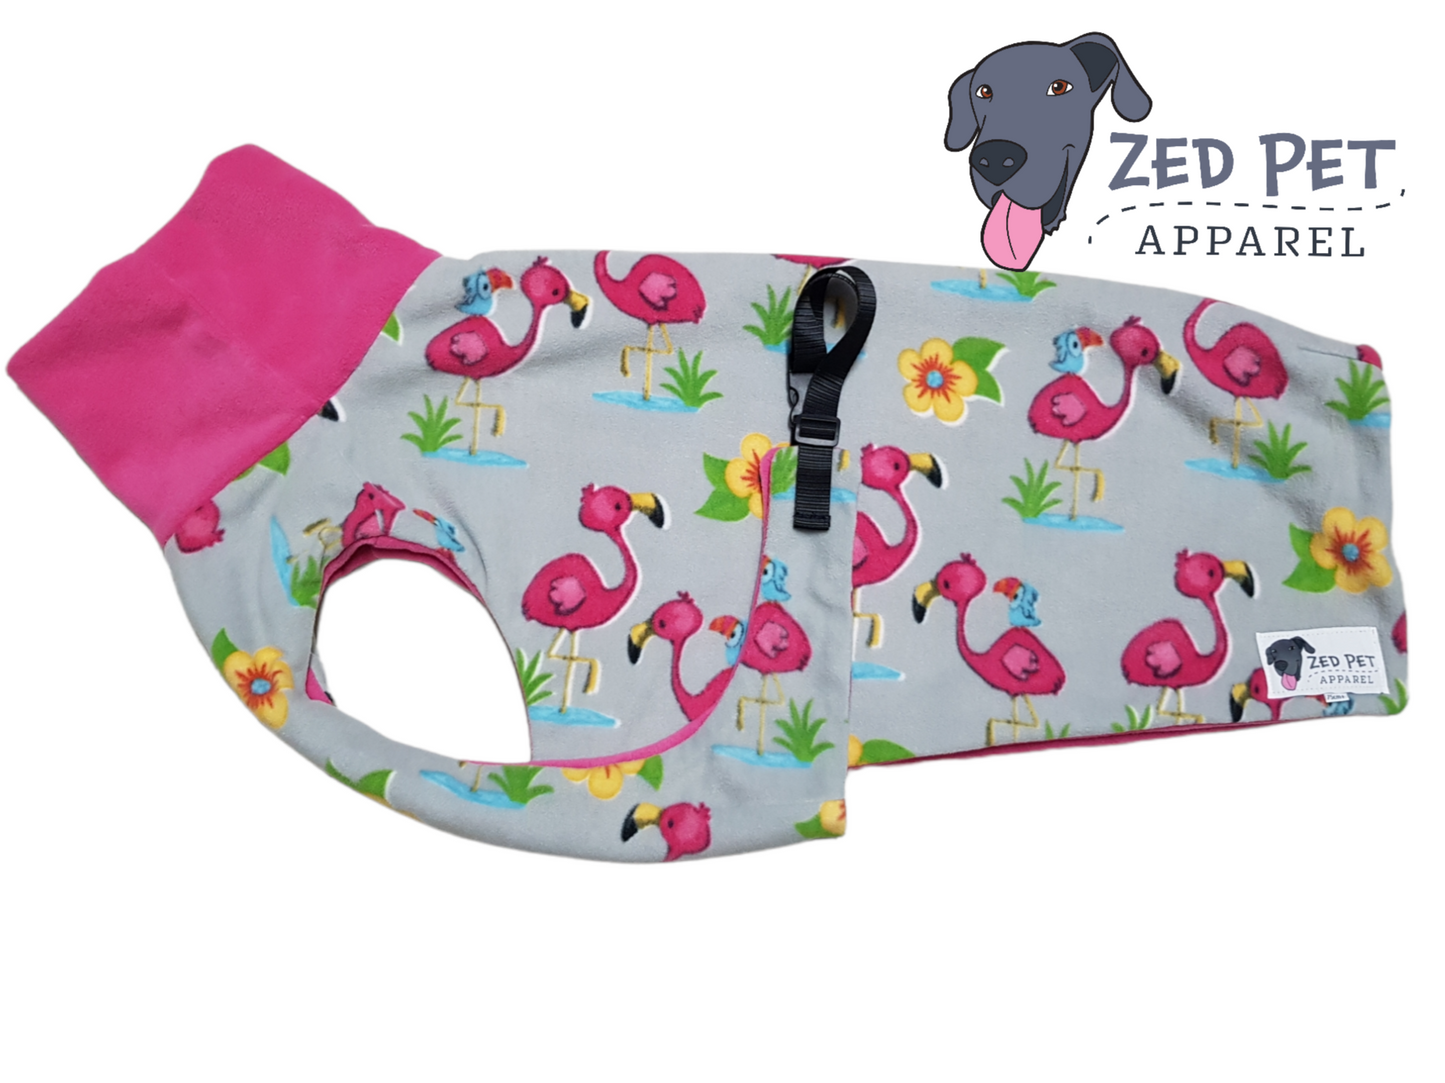 Grey dog coat with pink flamingos and yellow flowers and a pink turtleneck on the coat